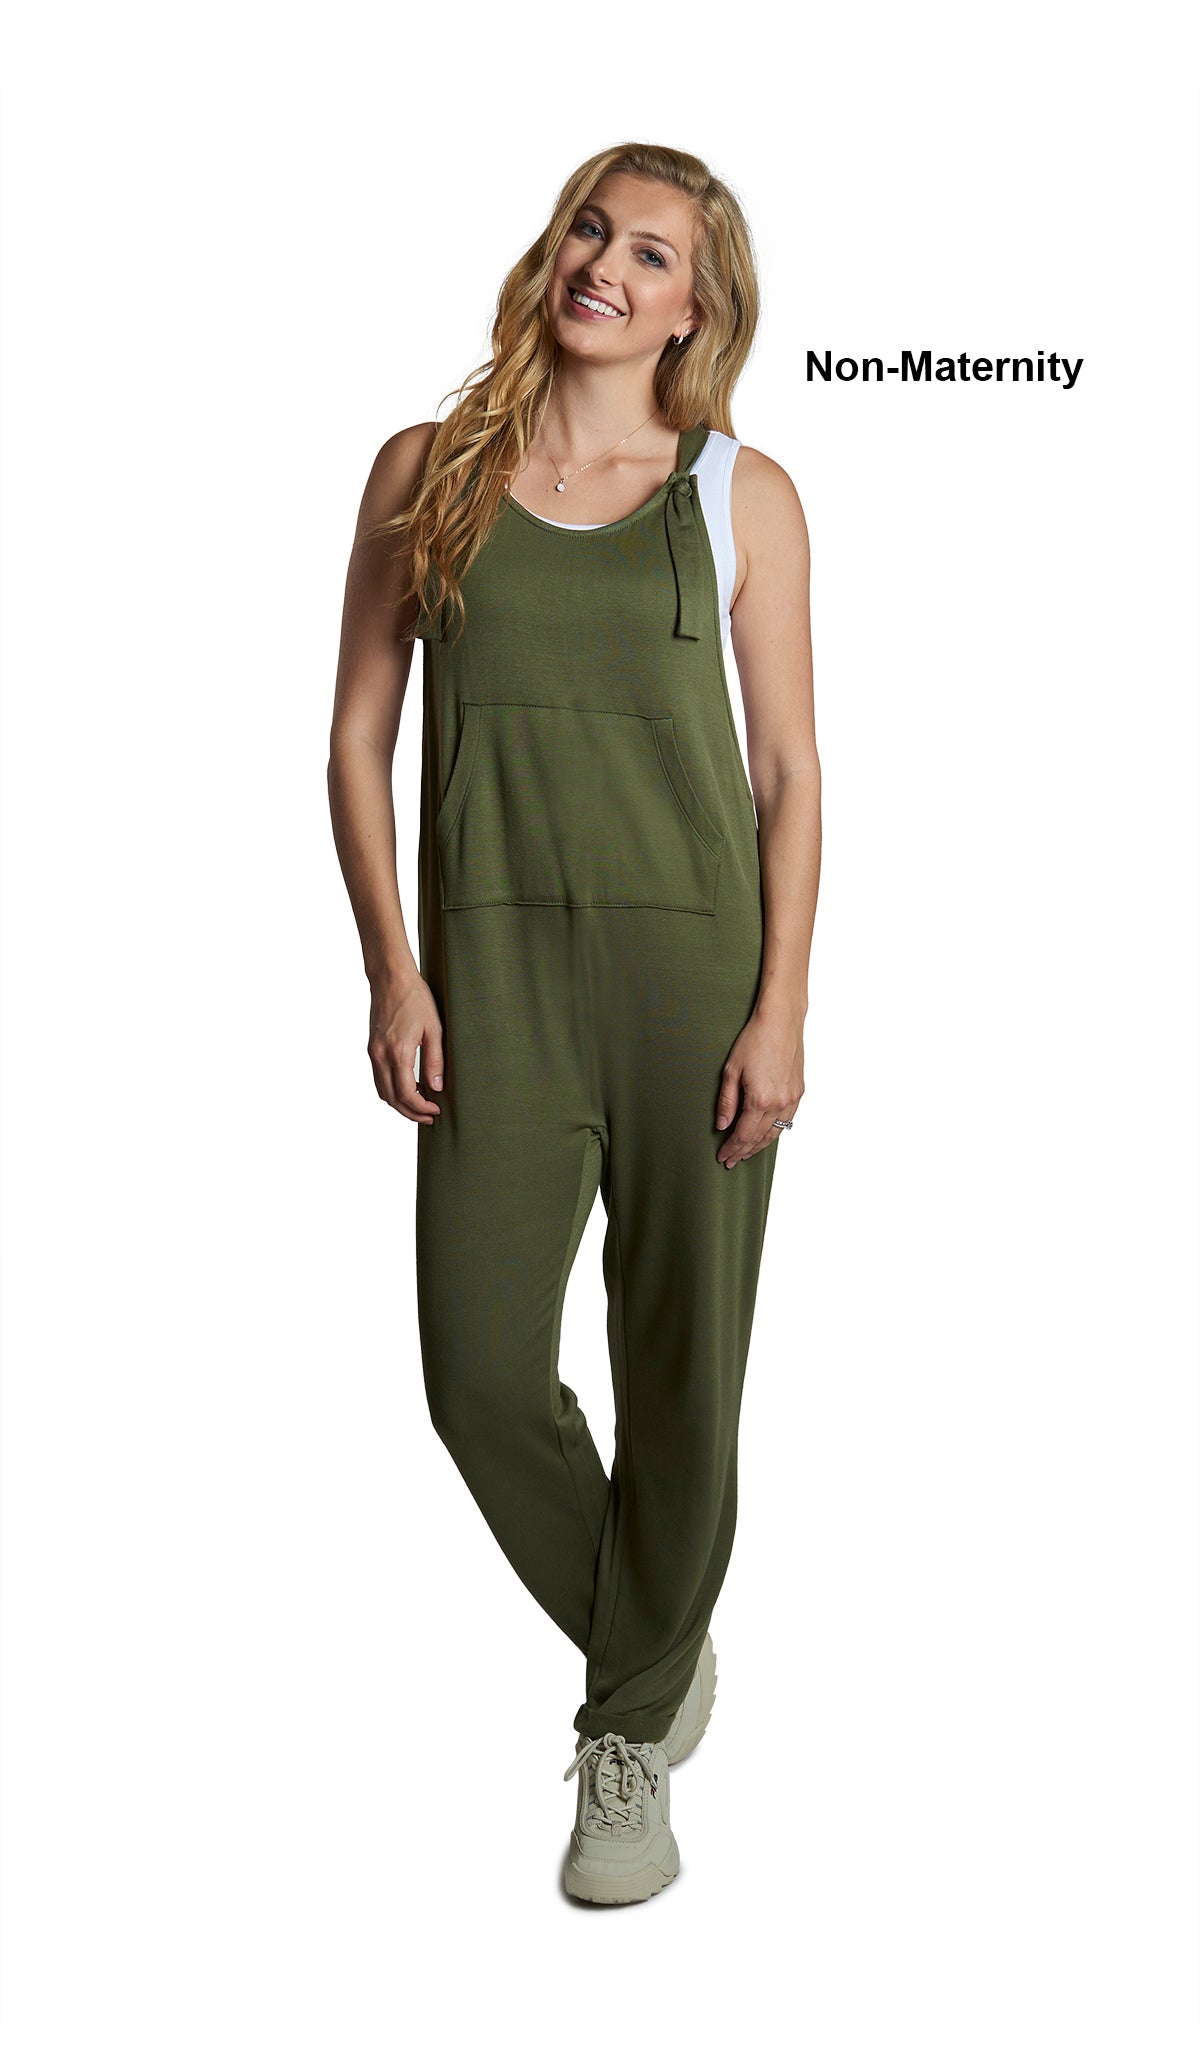 French Terry Olive Natalie Overall. Woman wearing short sleeve tee shirt under Natalie overall as non-maternity.